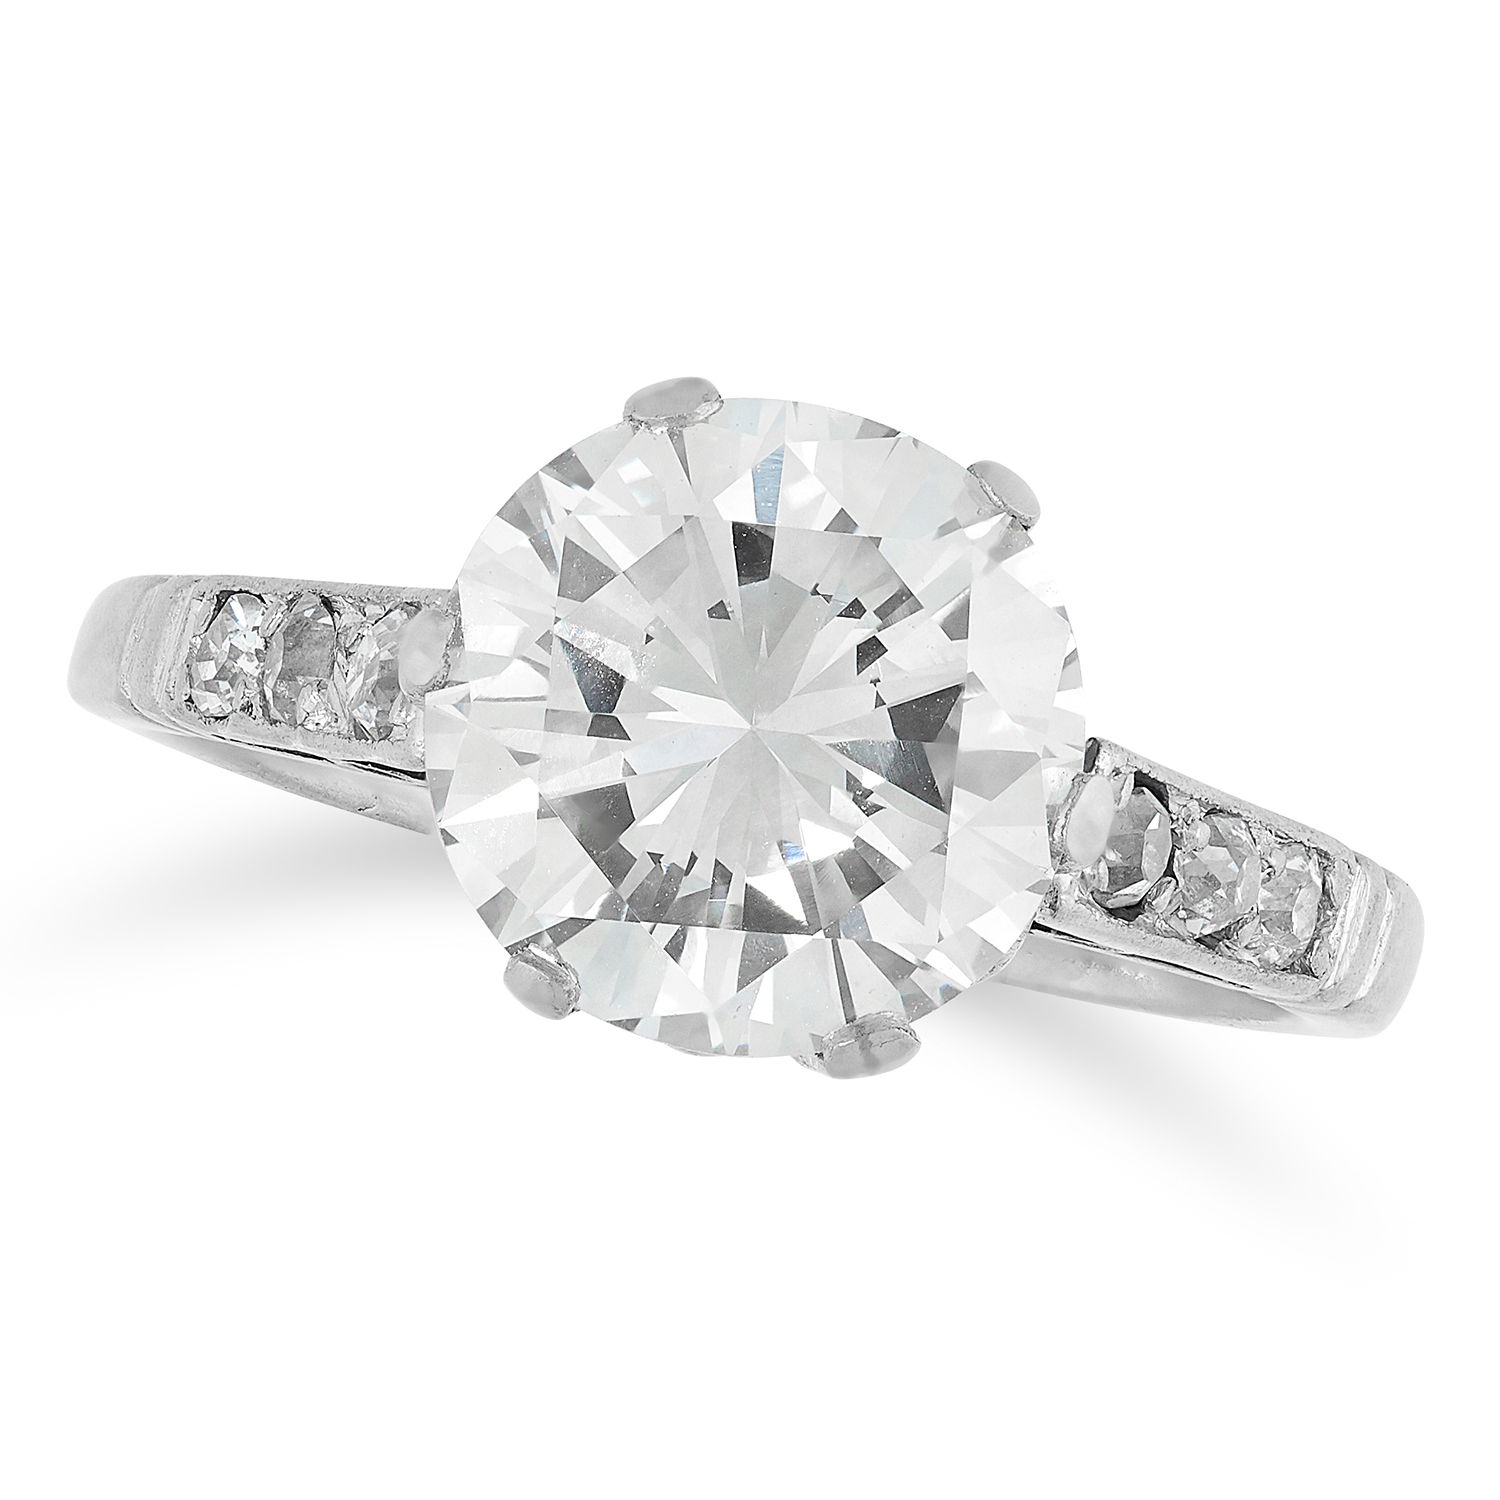 A 2.48 CARAT DIAMOND SOLITAIRE RING set with a principal round cut diamond of 2.48 carats with